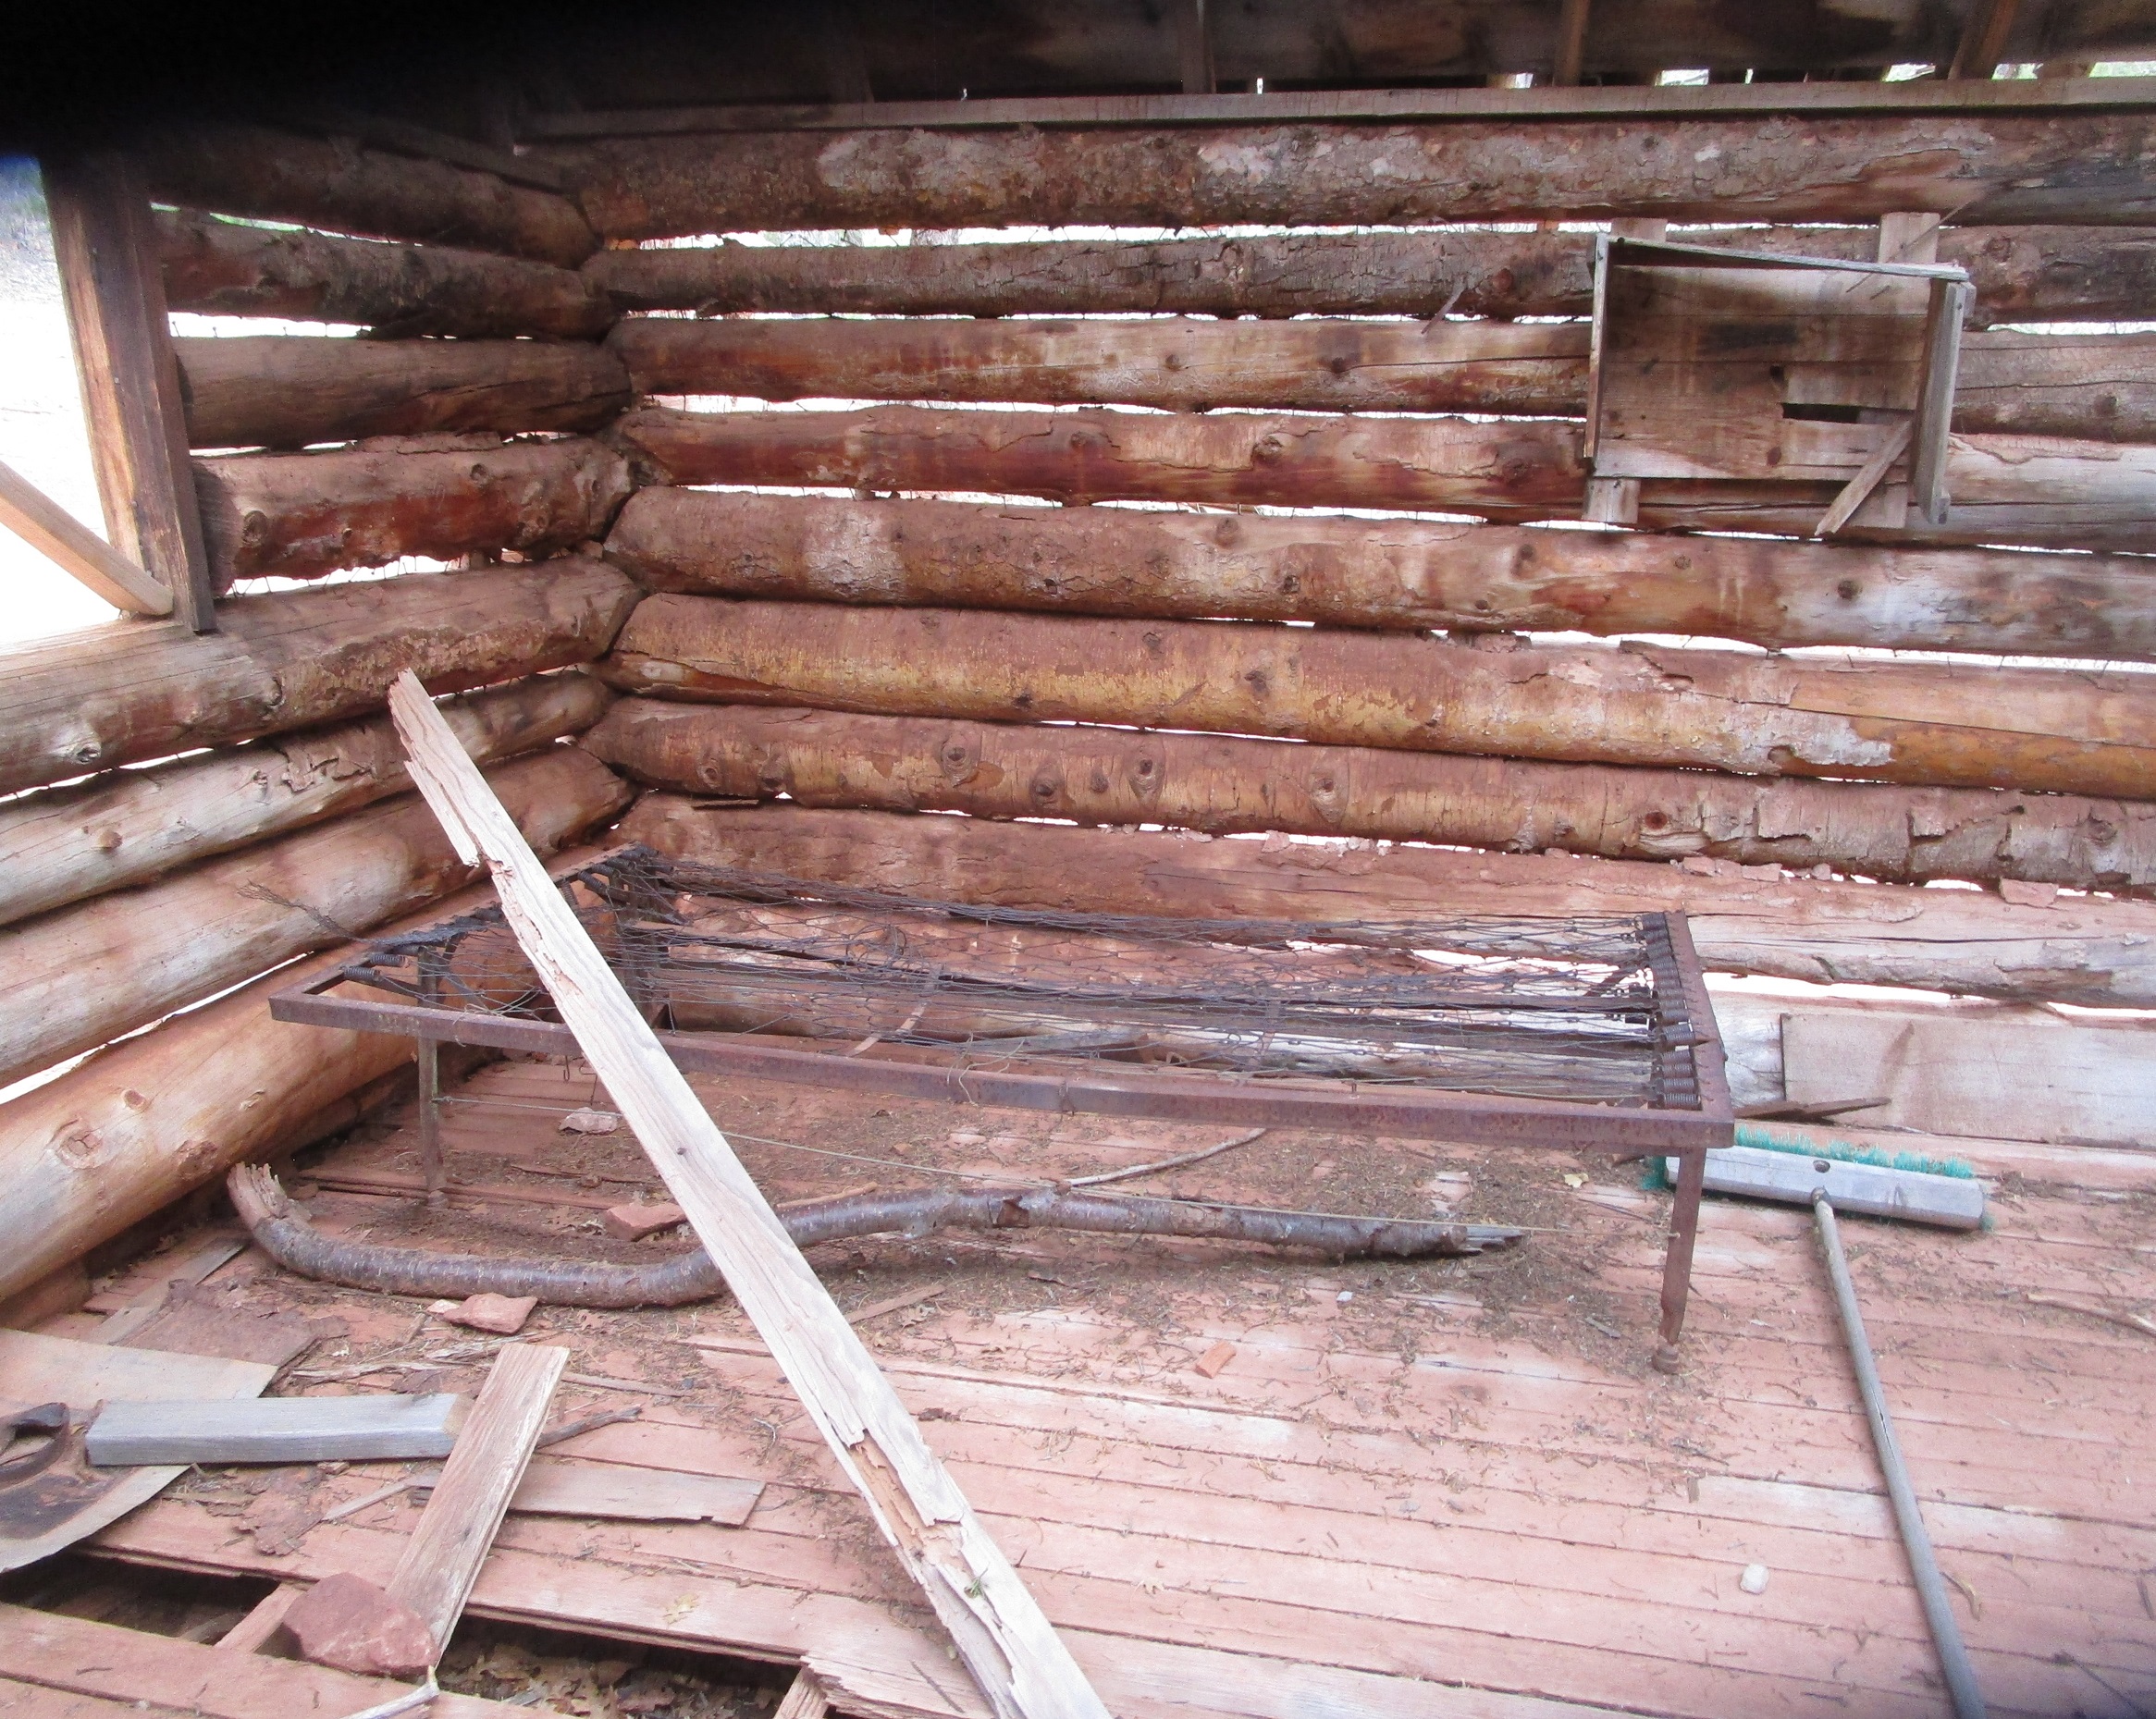 The inside of the old Larson Cabin in Zion National Park